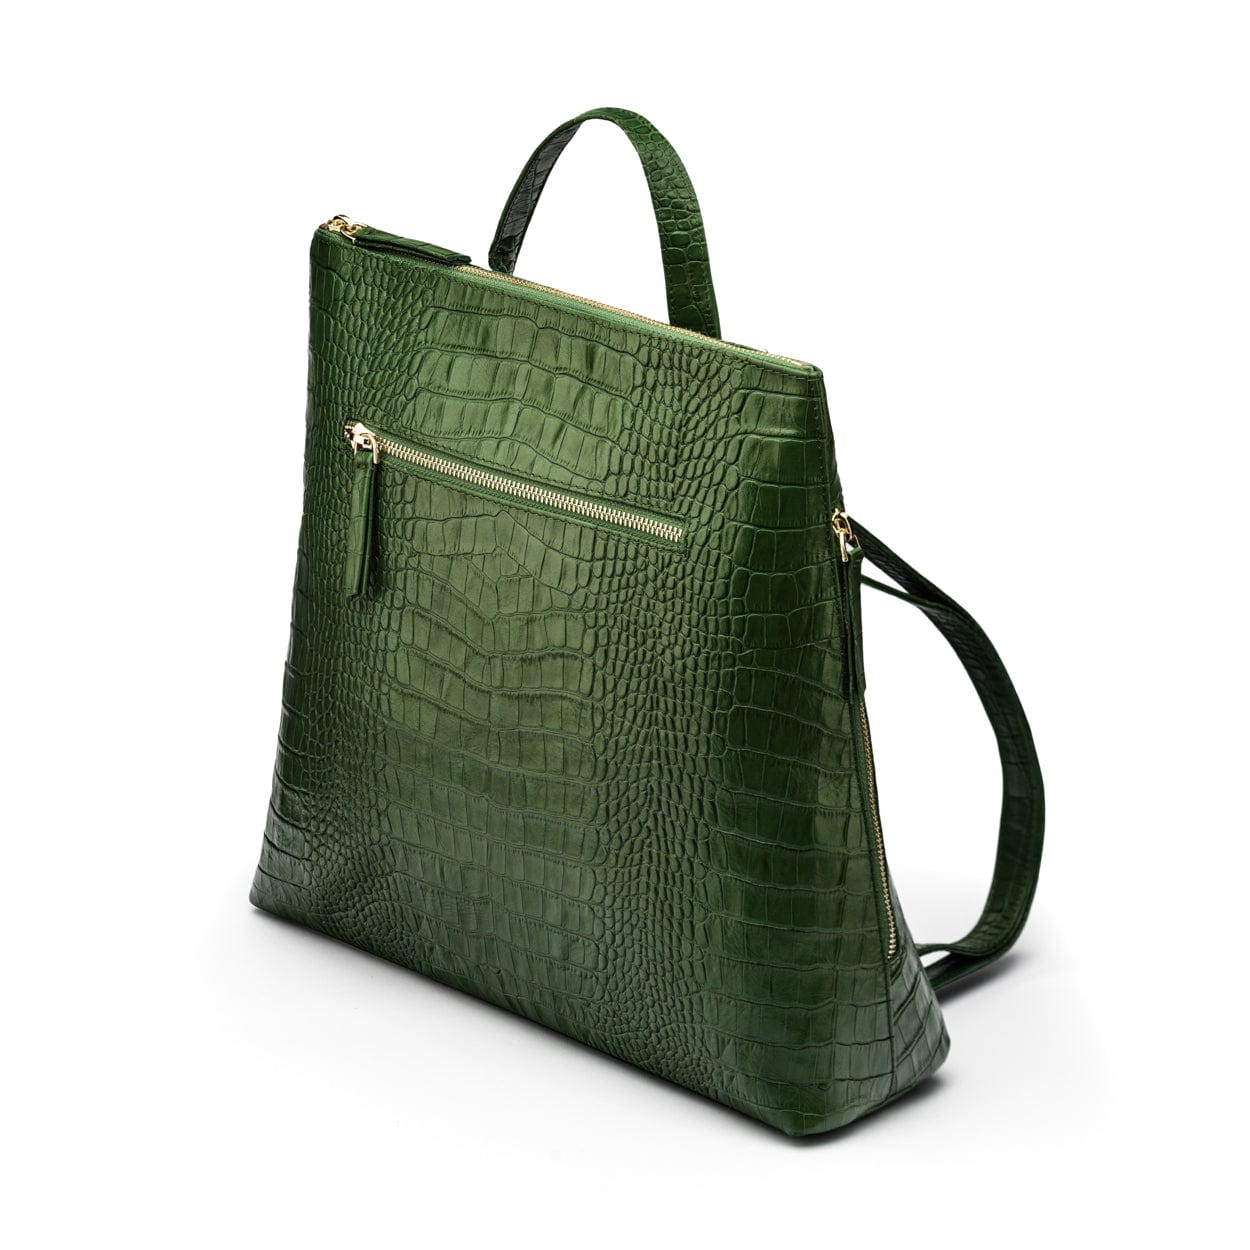 Leather 13" laptop backpack, green croc, side